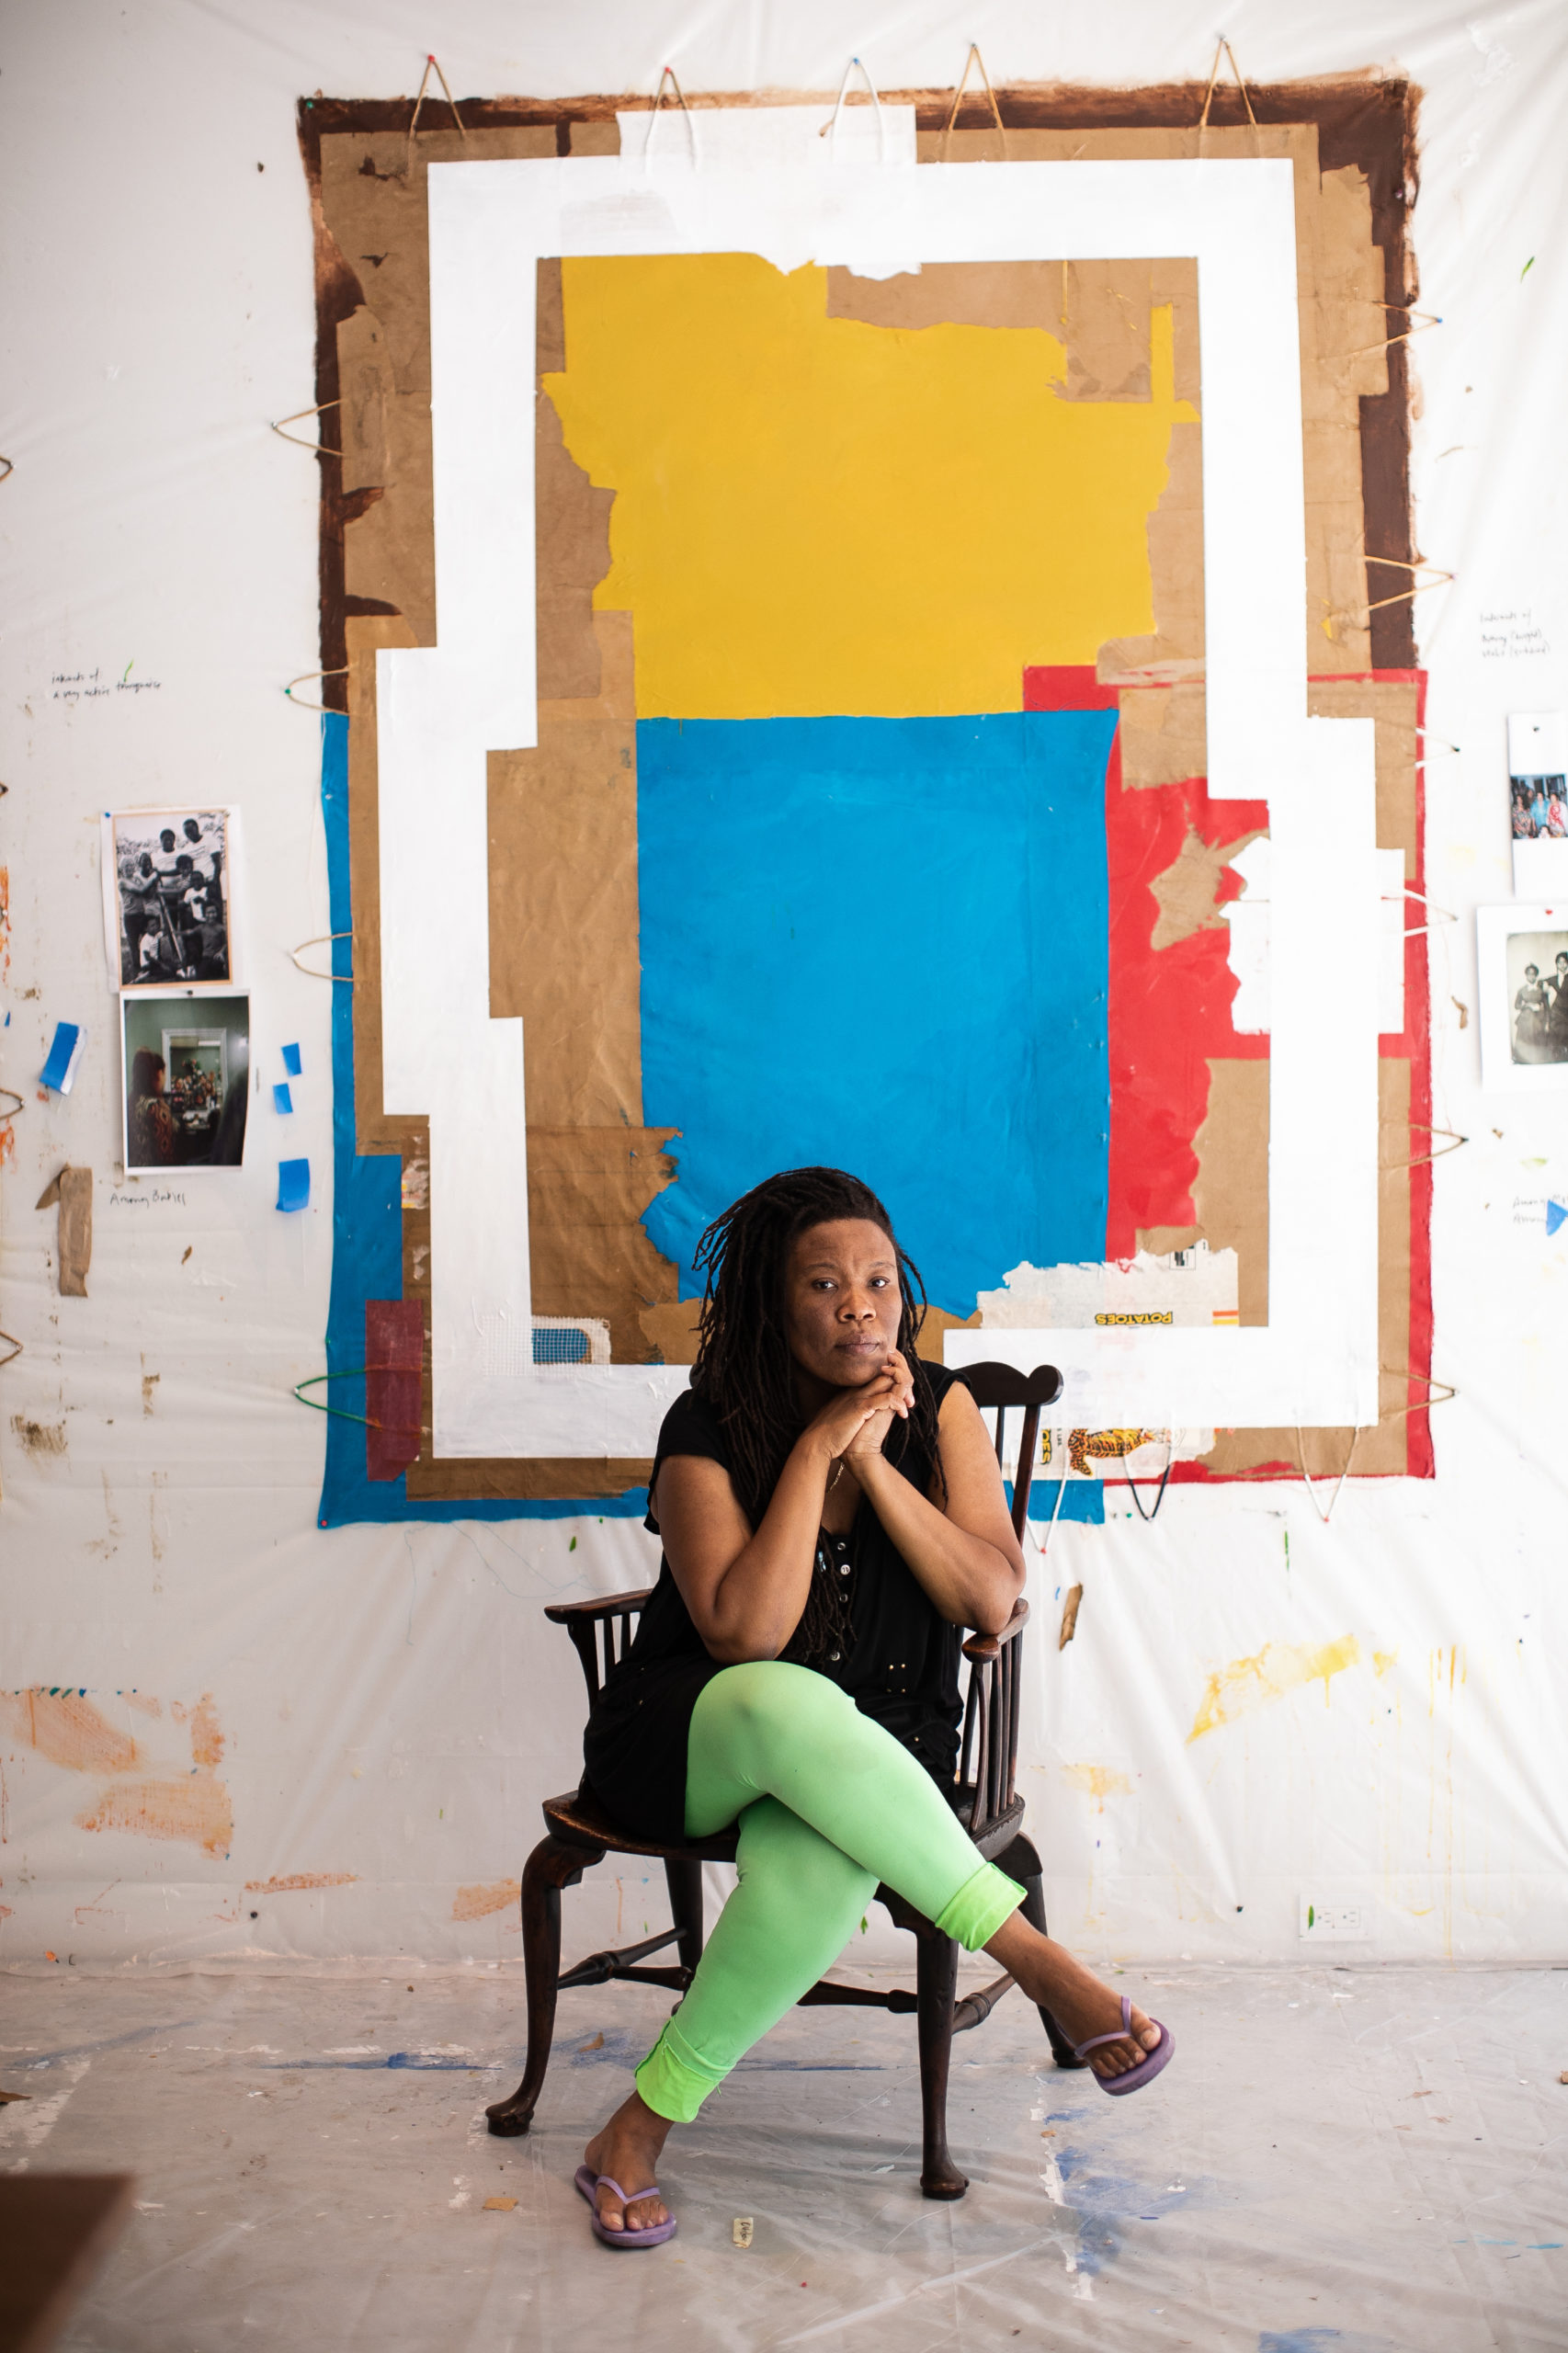 Artist Tomashi Jackson will be honored at the Parrish's Midsummer Weekend.